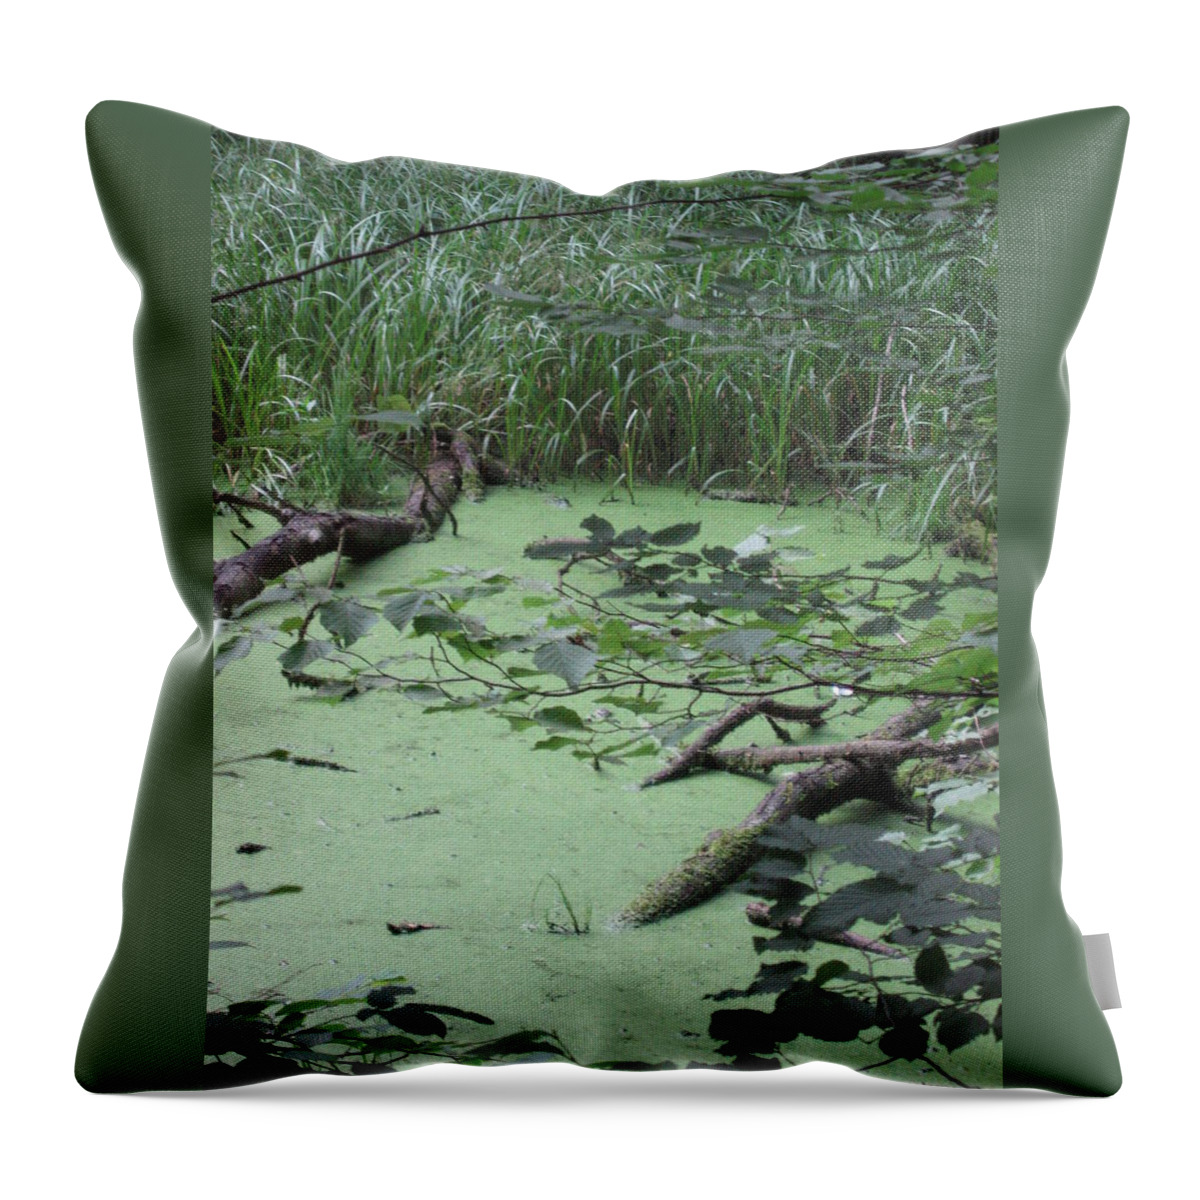  Throw Pillow featuring the photograph Swamp by Nora Boghossian